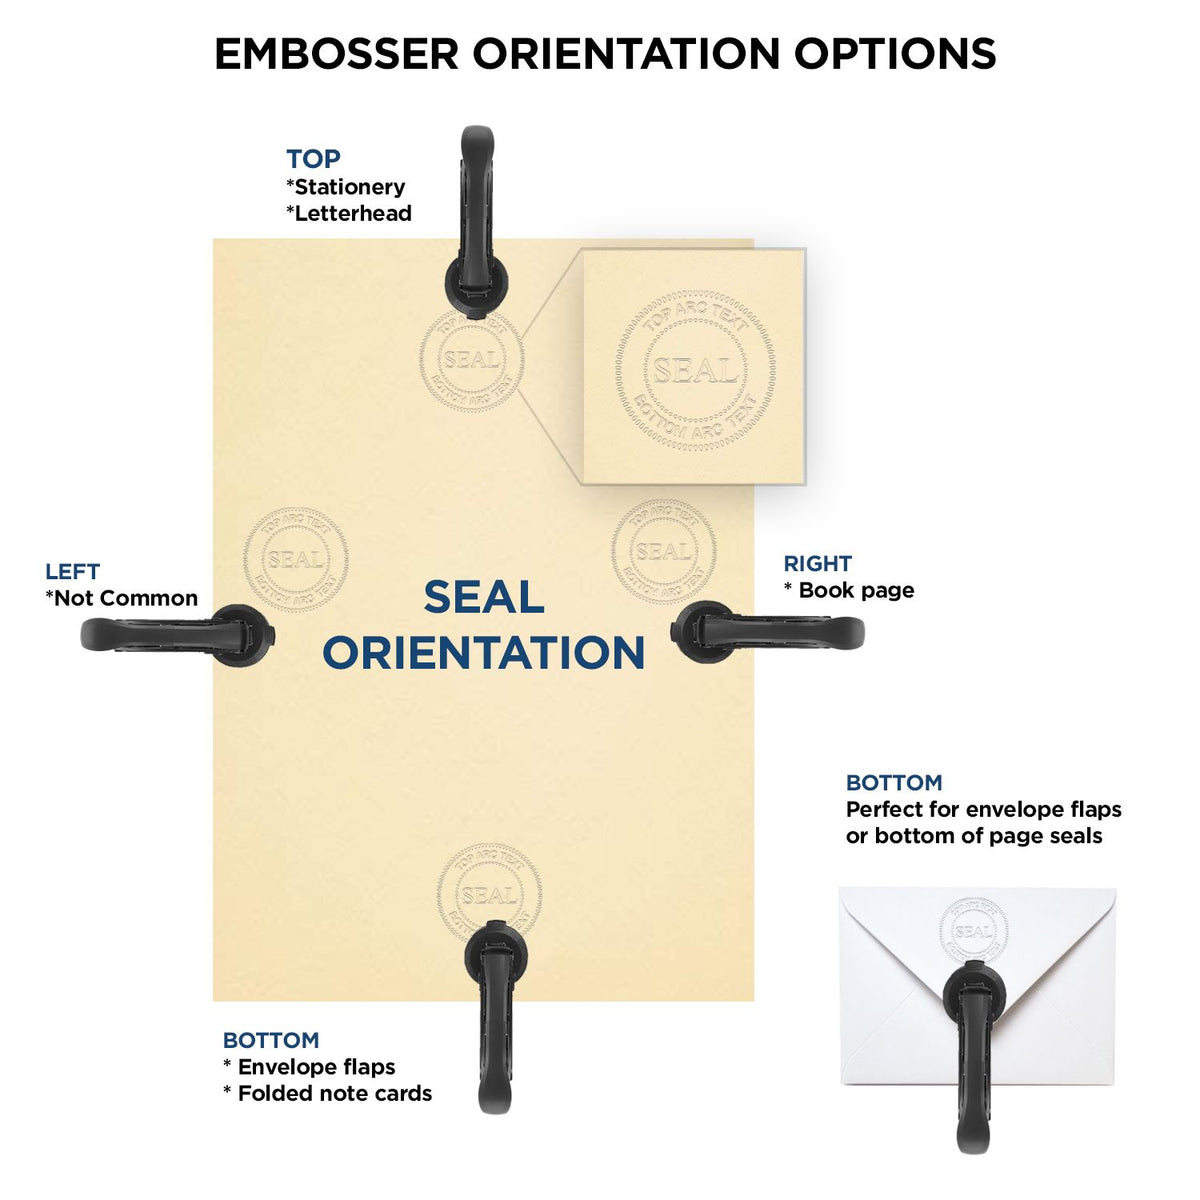 An infographic for the Mississippi Geologist Desk Seal showing embosser orientation, this is showing examples of a top, bottom, right and left insert.